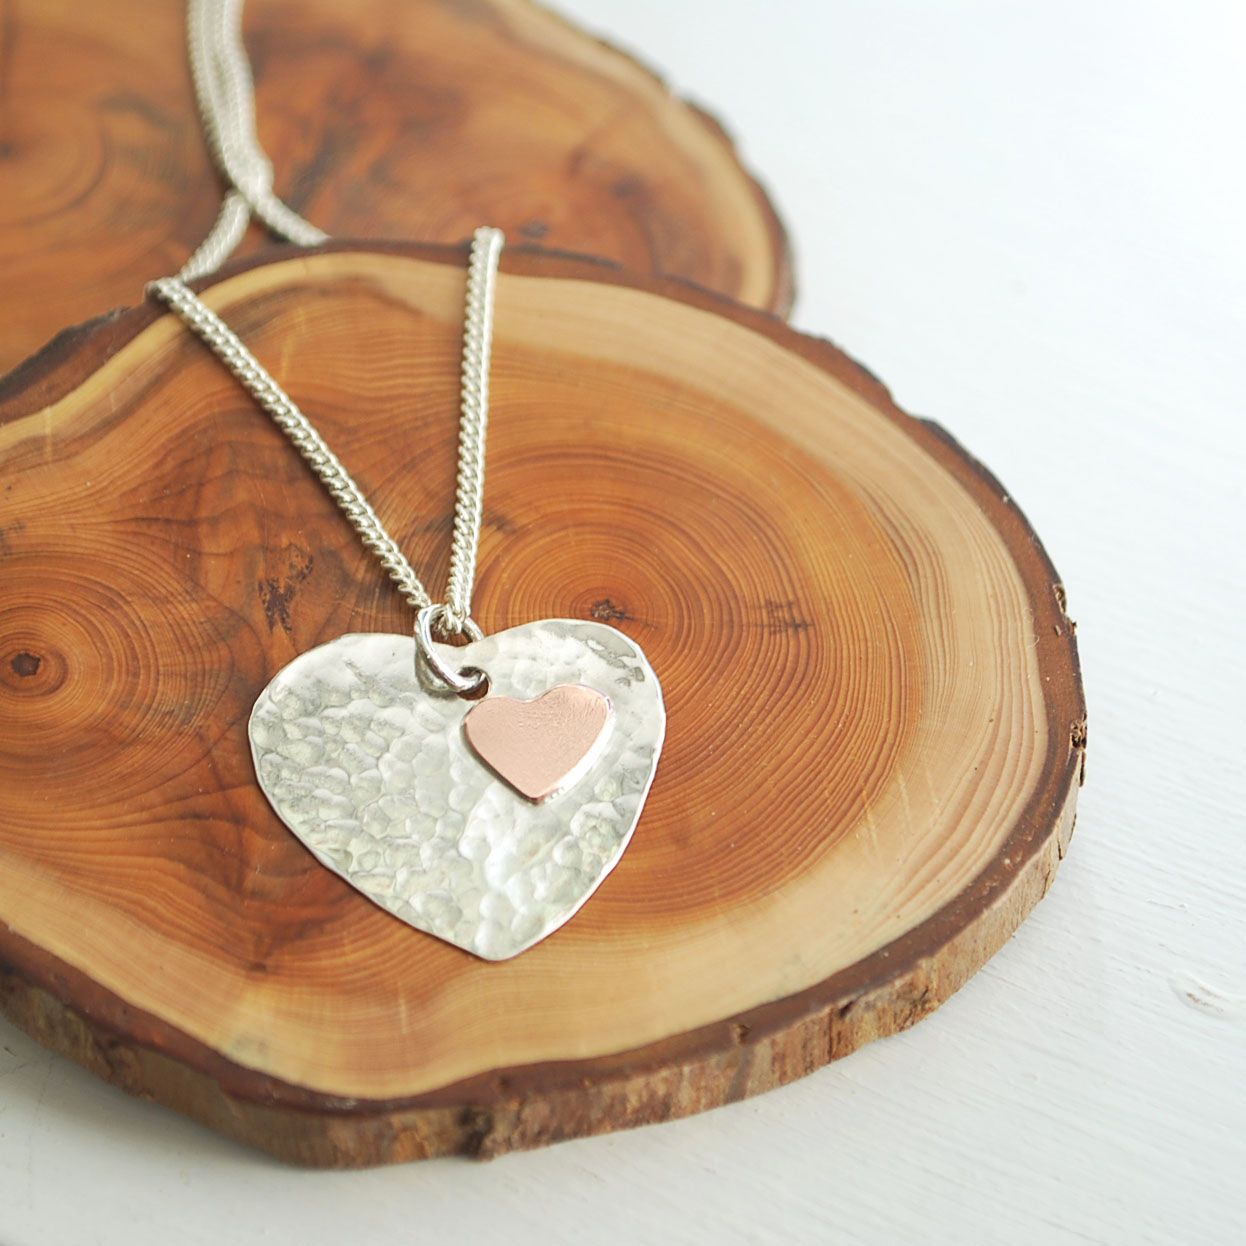 Silver clay jewellery - DIY tutorial - From Britain with Love